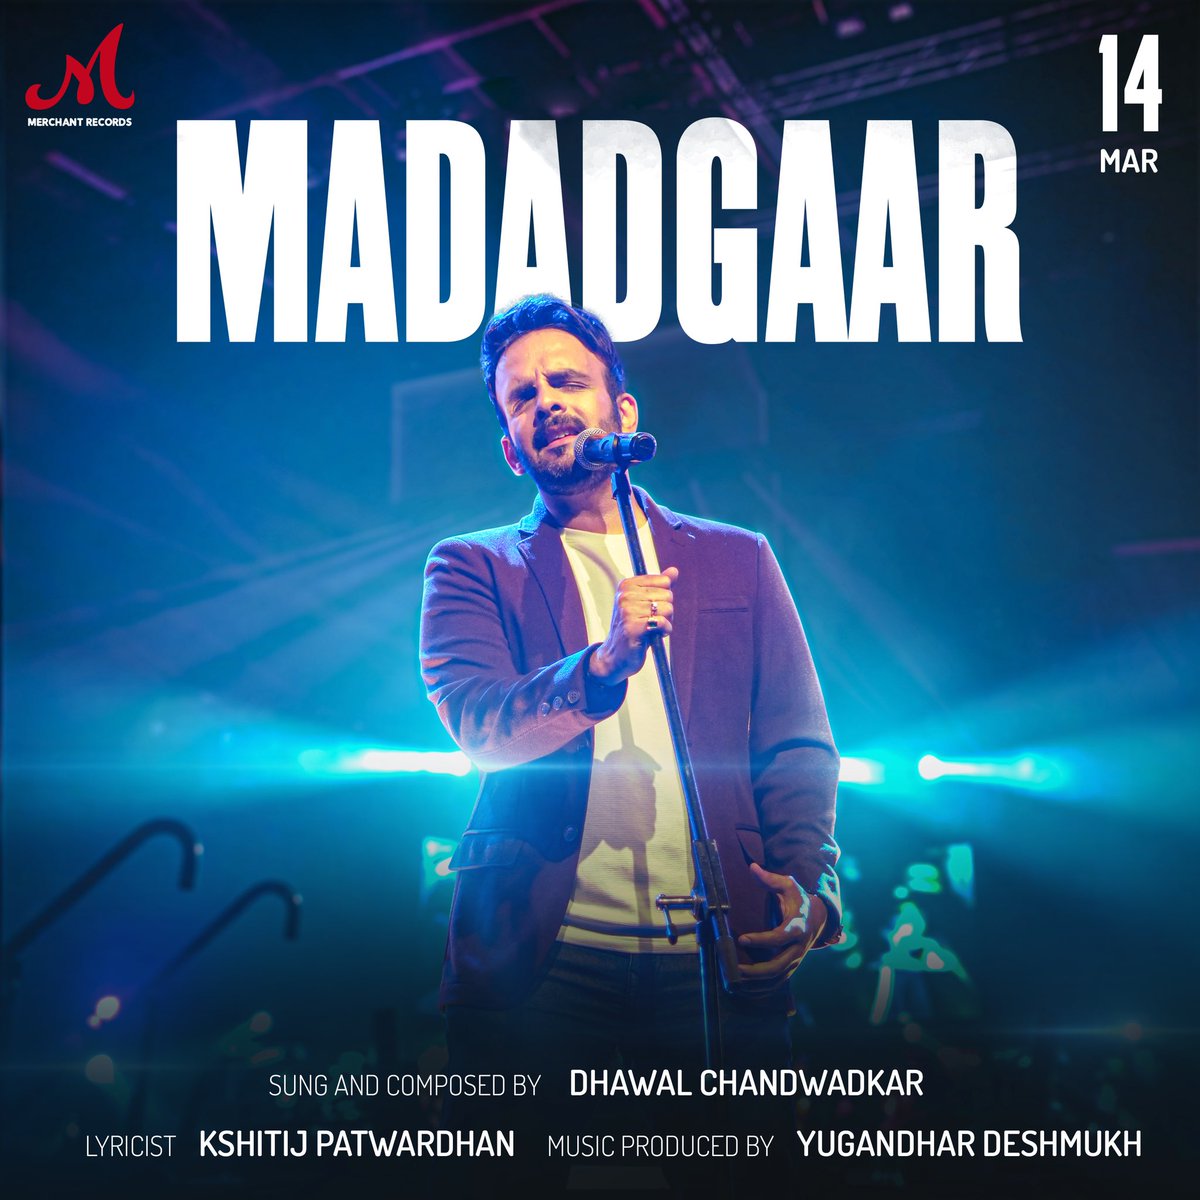 🎶 Get ready to be enchanted! #Madadgaar's first look is here! Join us on March 14th for a musical masterpiece by @dhawalchandwadkar and team. Don't miss out! 🎵 Releasing on @SlimSulaiman’s YouTube channel and all audio platforms! #MerchantRecords #SalimSulaiman